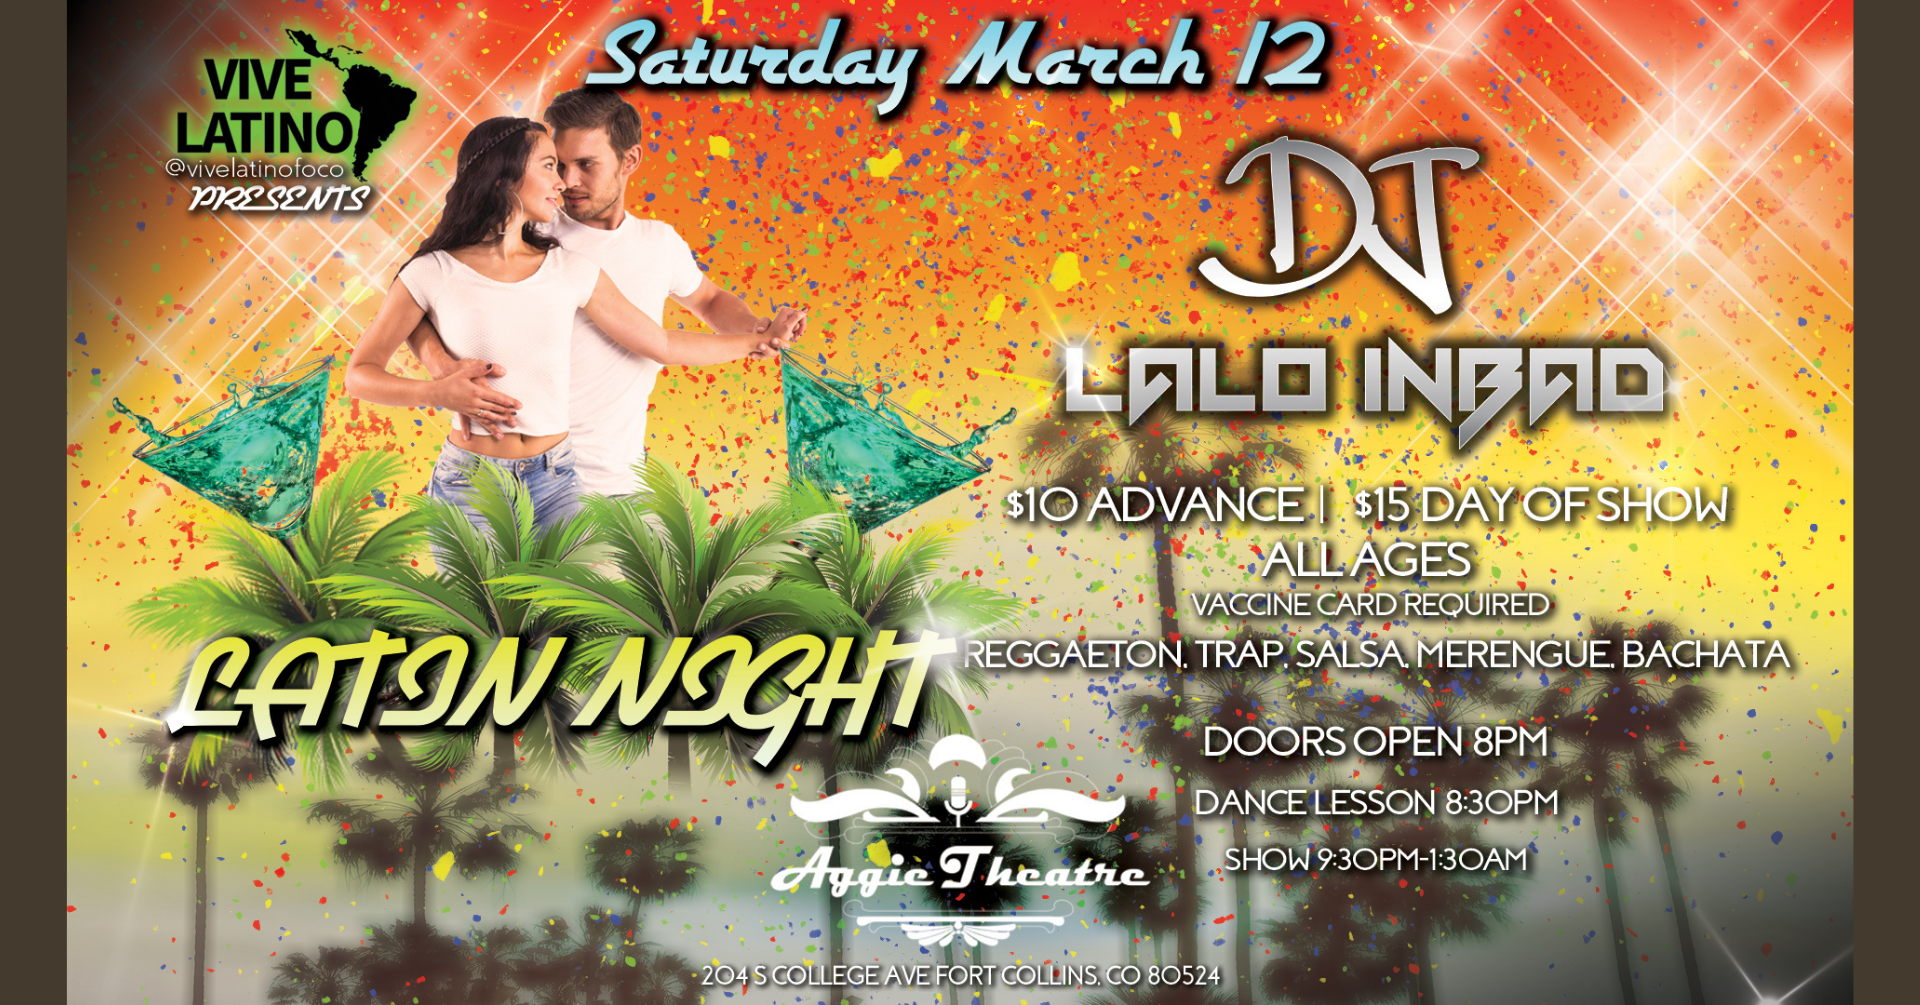 More Info for Latin Night ft DJ Lalo in.Bad